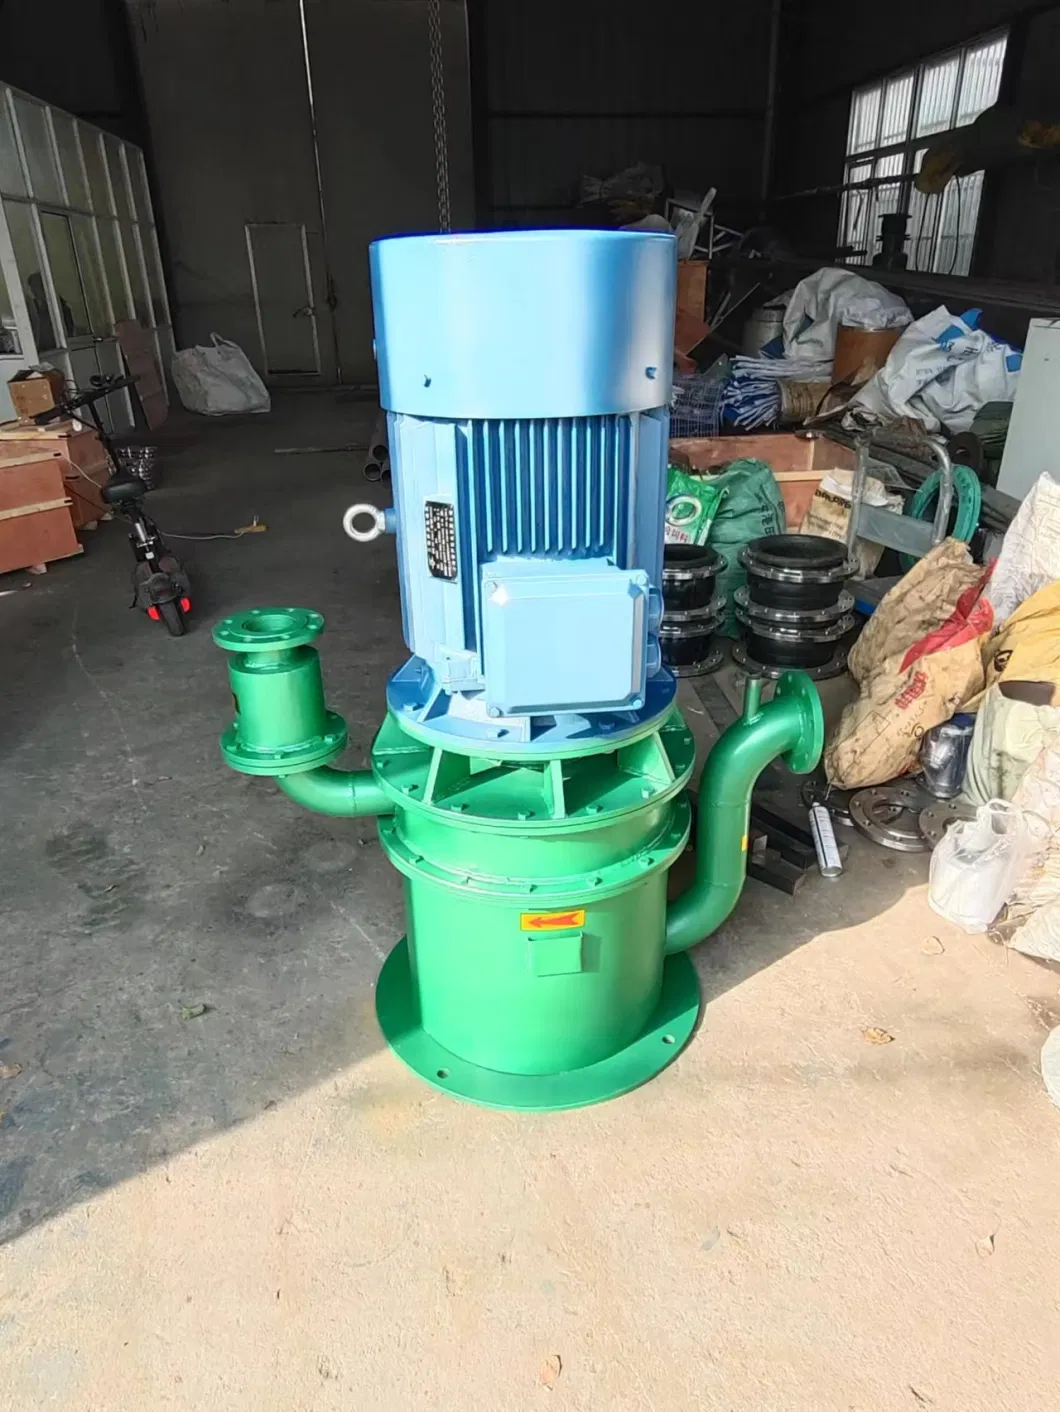 Wfb Series Unsealed Automatic Control Self-Priming Pump